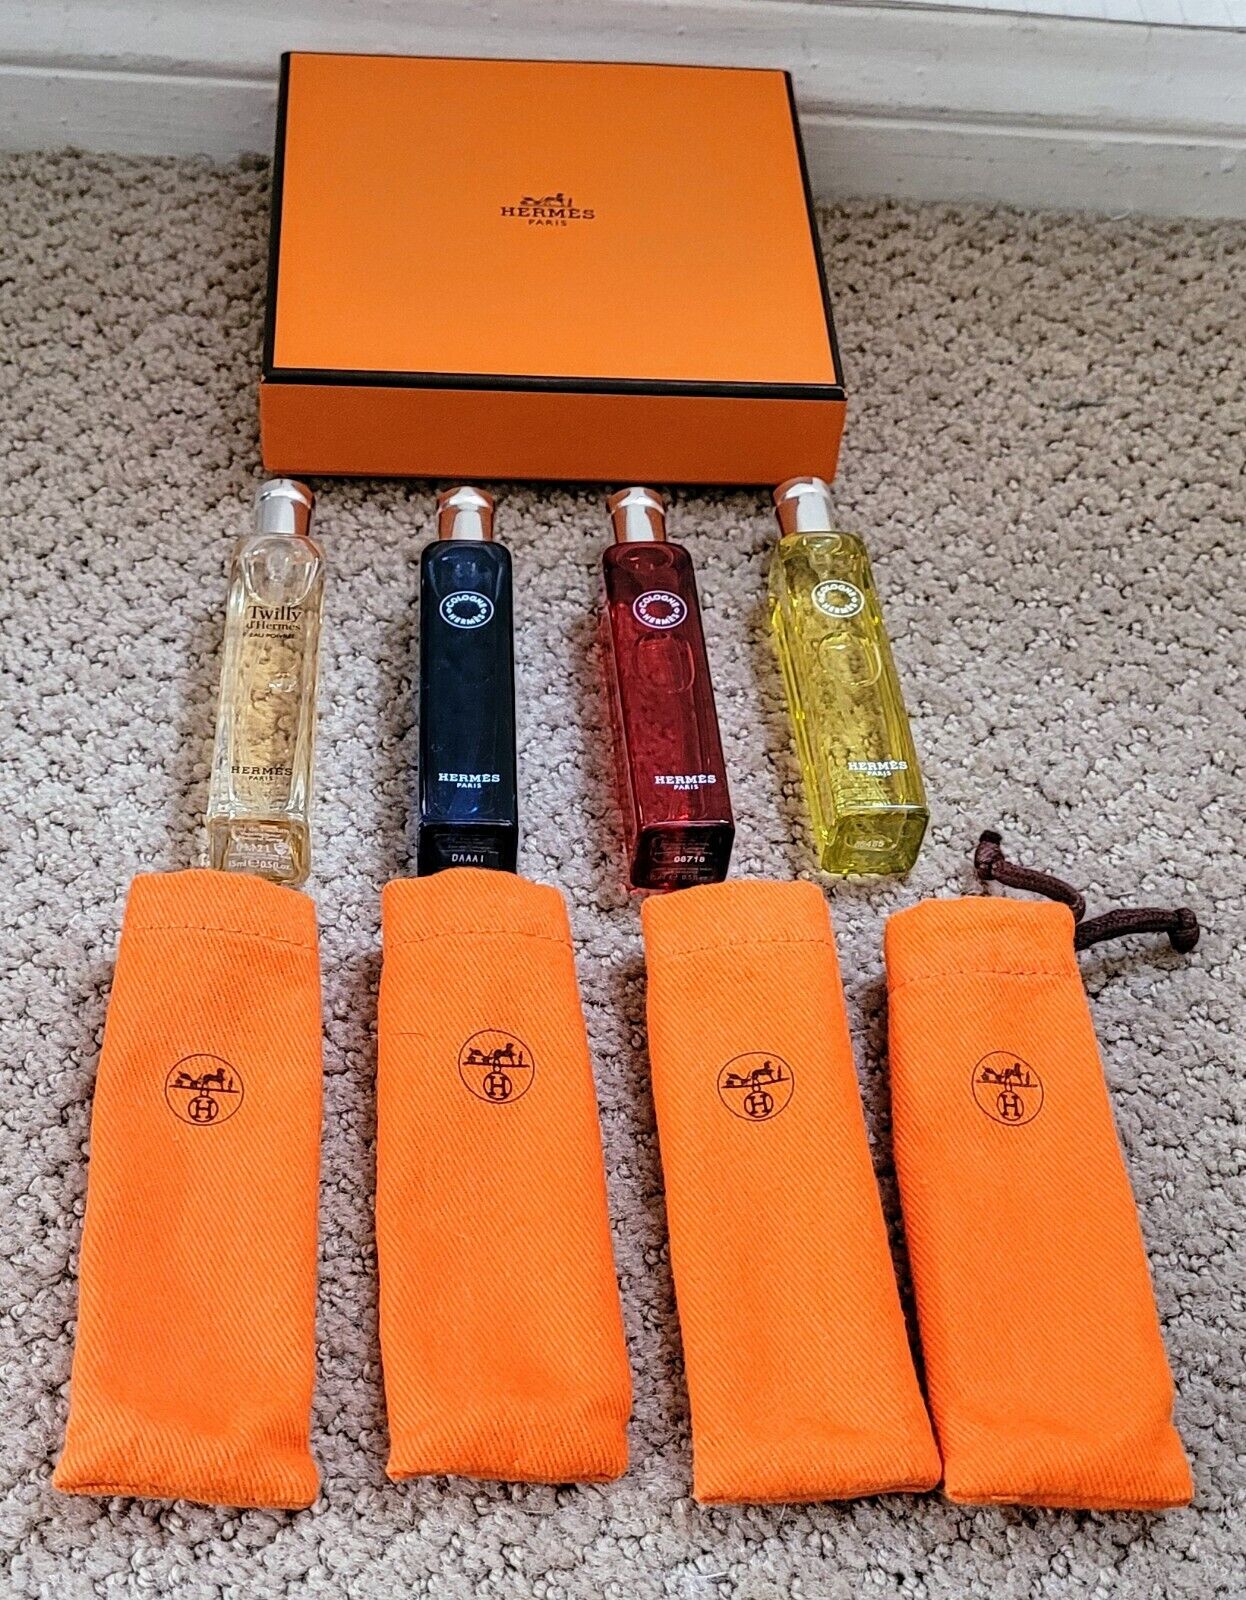 NWOT AUTH HERMES 4 PC FRAGRANCE TRAVEL SET WITH INDIVIDUAL DUSTBAG BOX 15 ML 